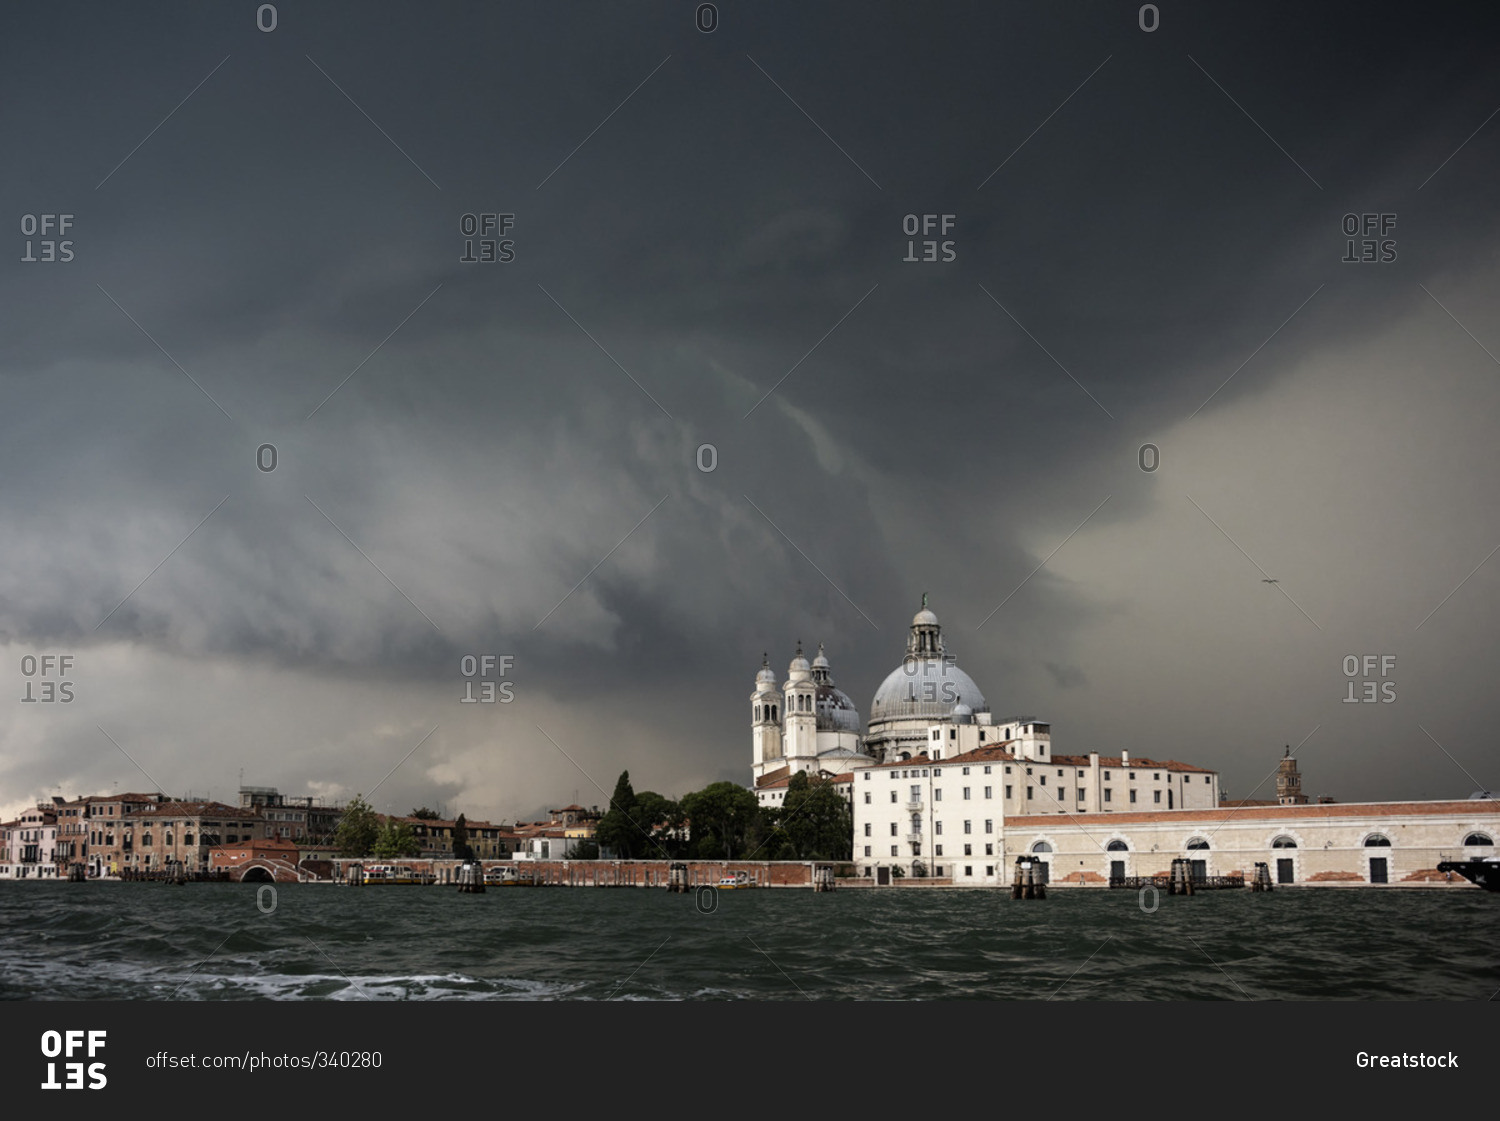 A thunderstorm looming above the Cathedral of Santa Maria della Salute, Venice